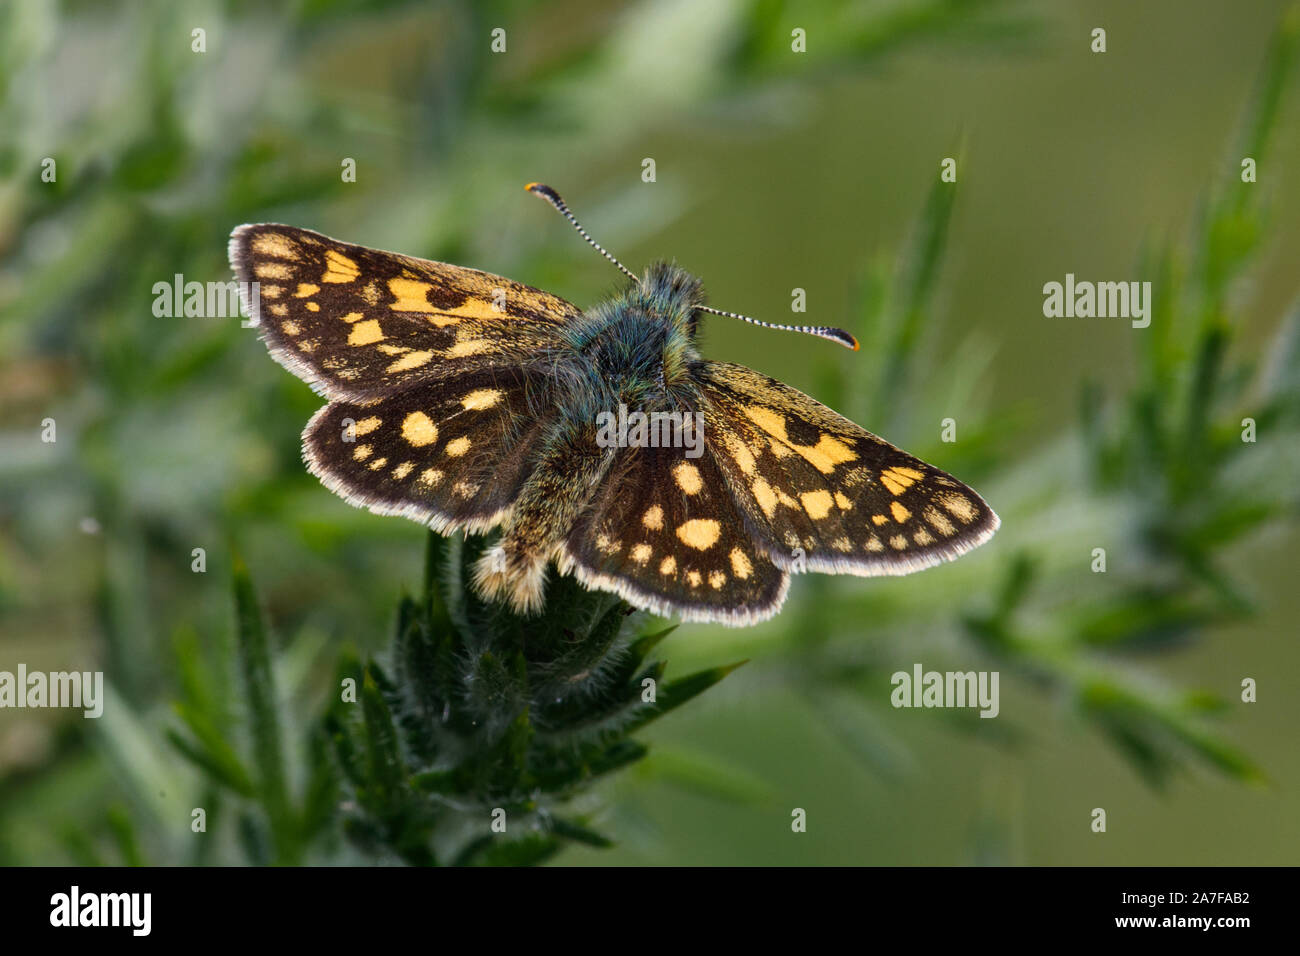 Chequered Skipper butterfly,Carterocephalus palaemon Stock Photo